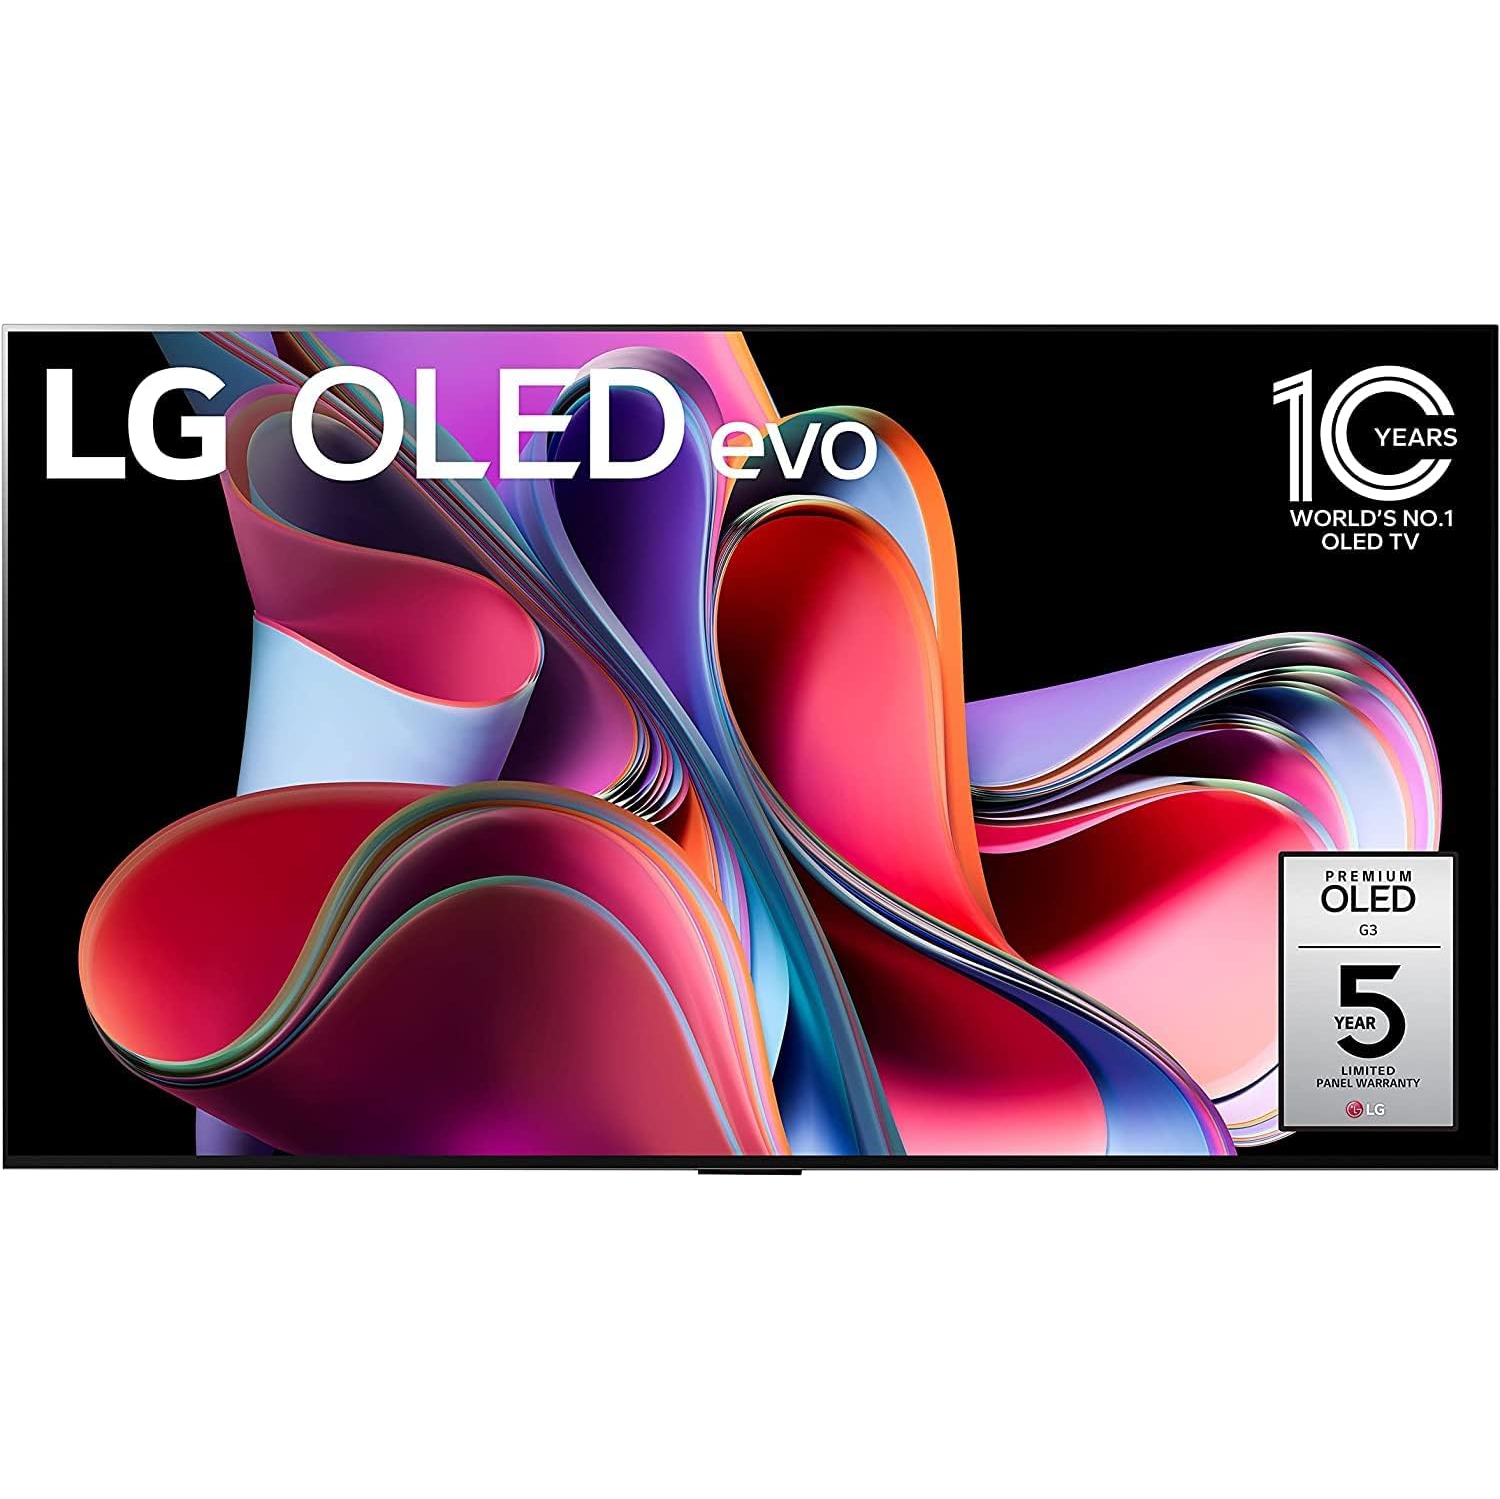 LG G3 MLA OLED evo 65-inch Gallery Edition 4K Smart TV - AI-Powered, Alexa Built-in, Gaming, 120Hz Refresh, VRR, Brightness Boost Max, 65" Television - Open Box -10/10 Condition